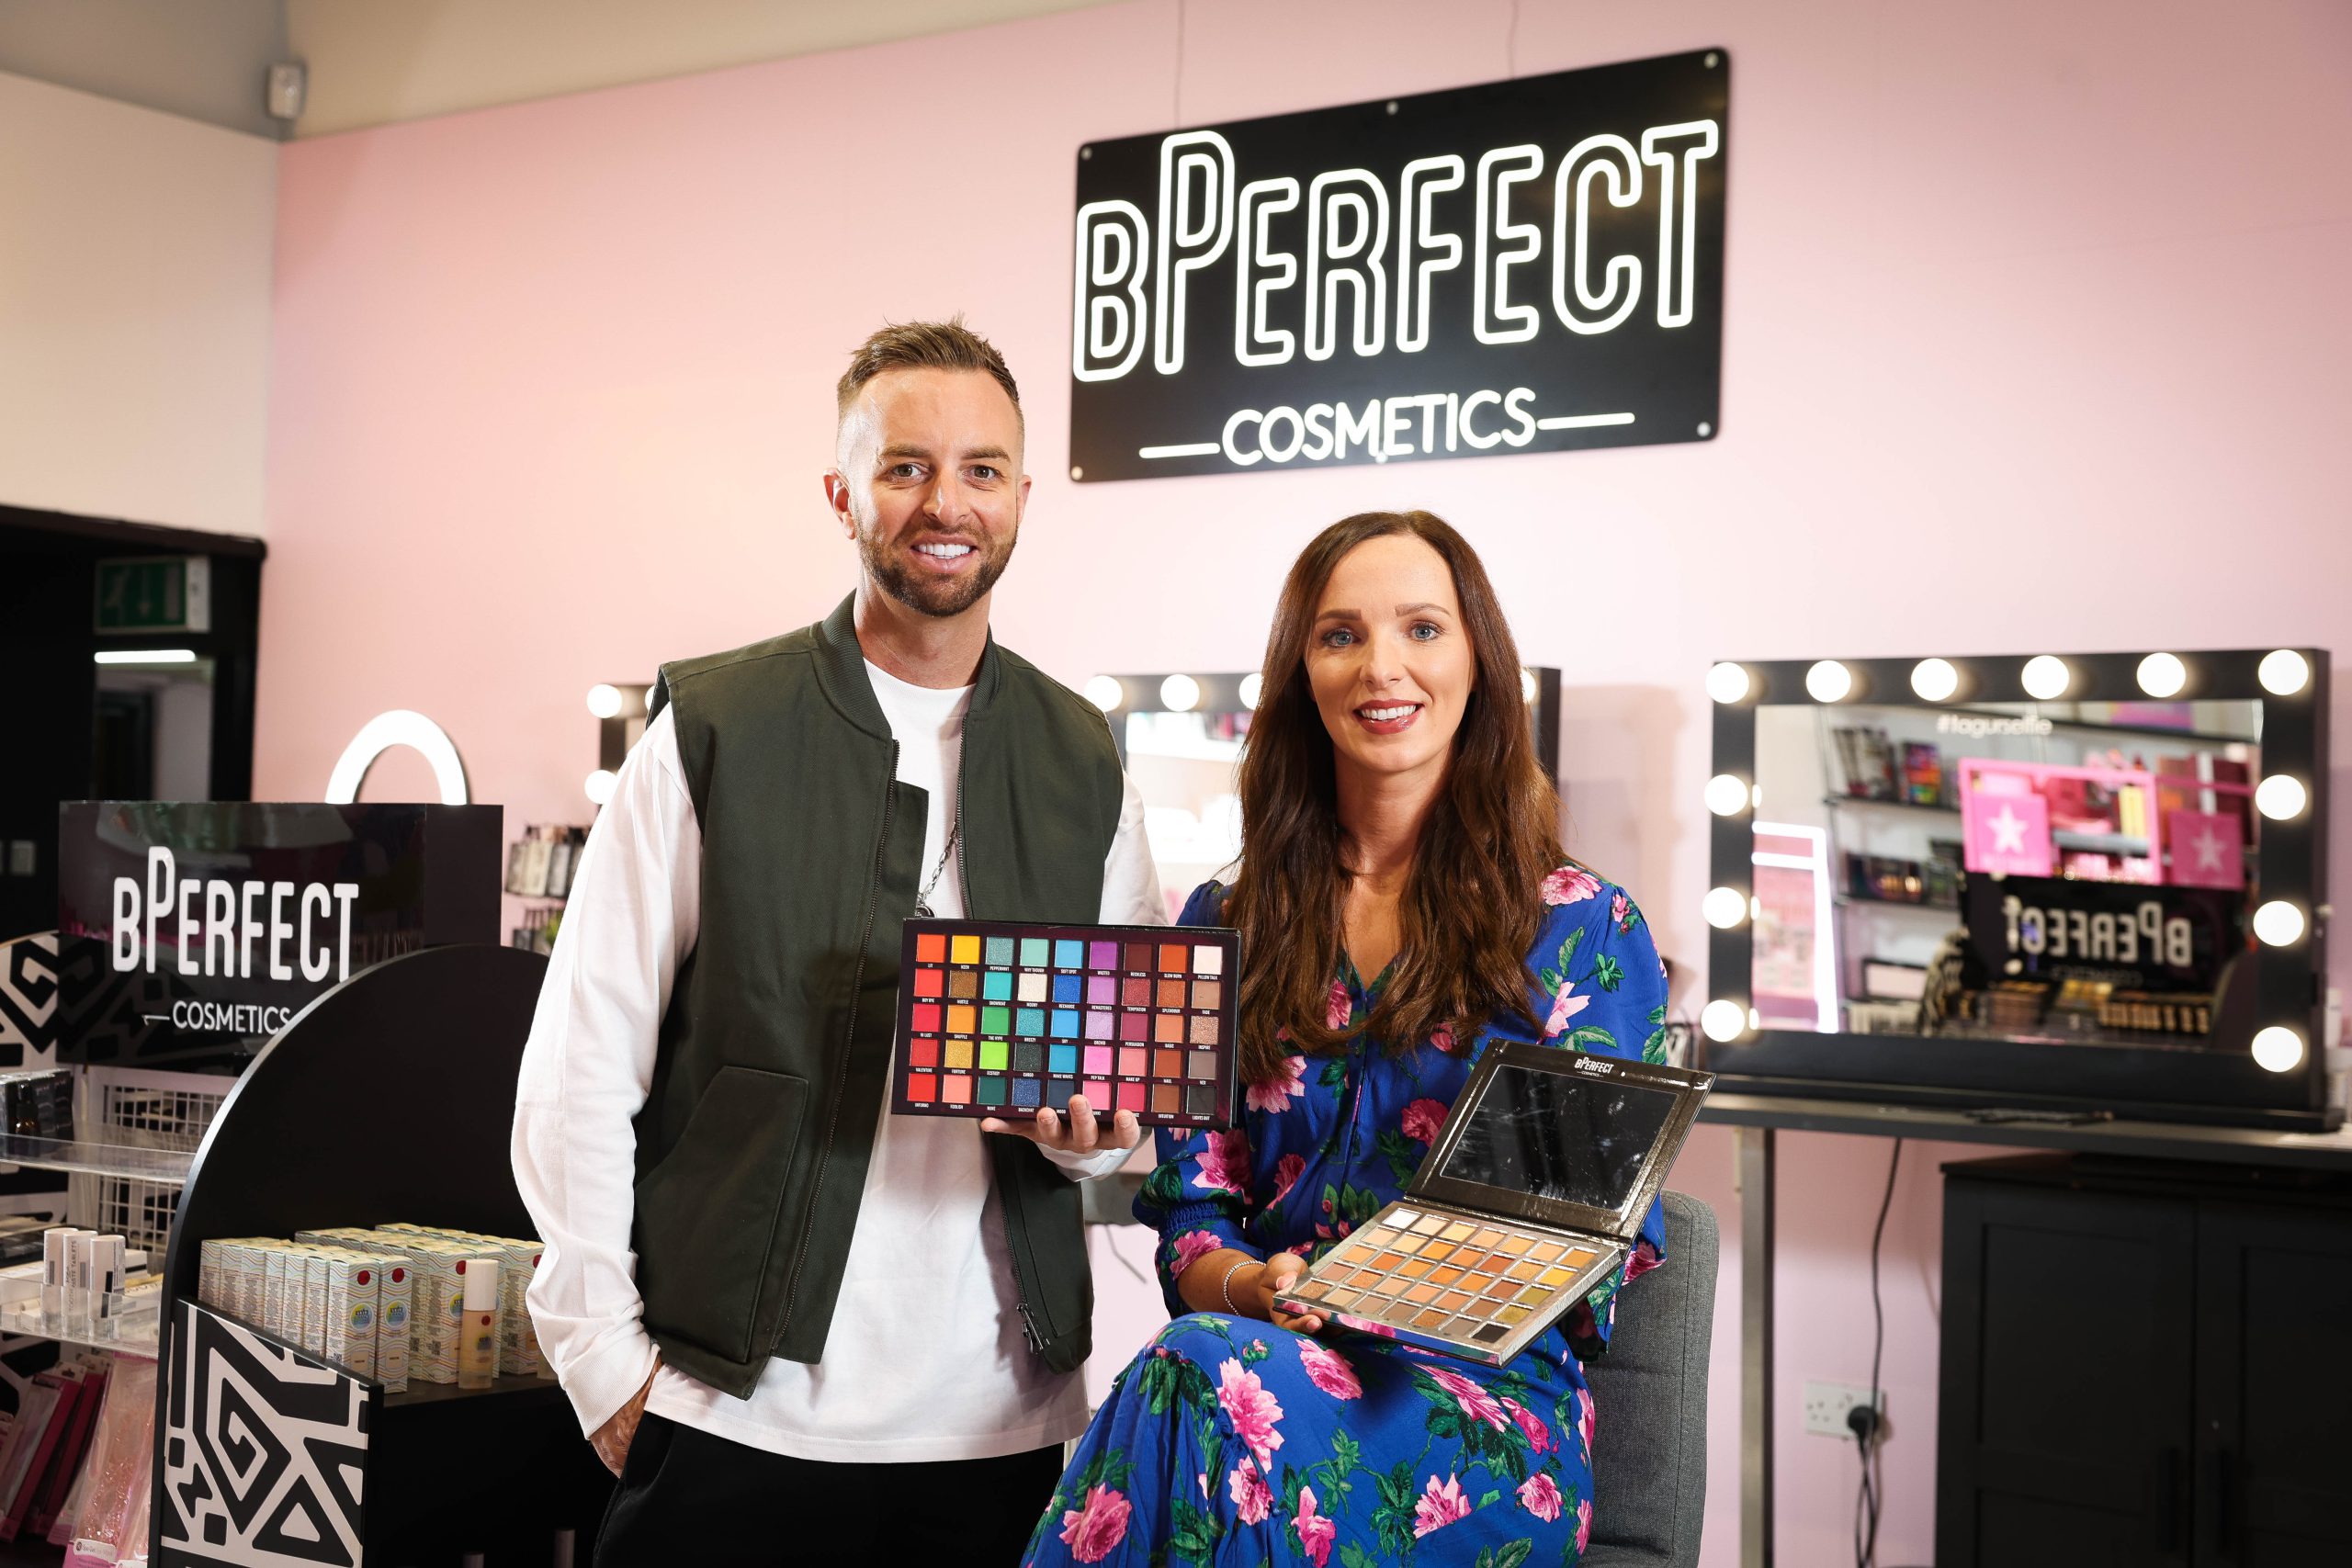 BPerfect Cosmetics announced as sponsor of Best Dressed at Down Royal’s Ladies Day